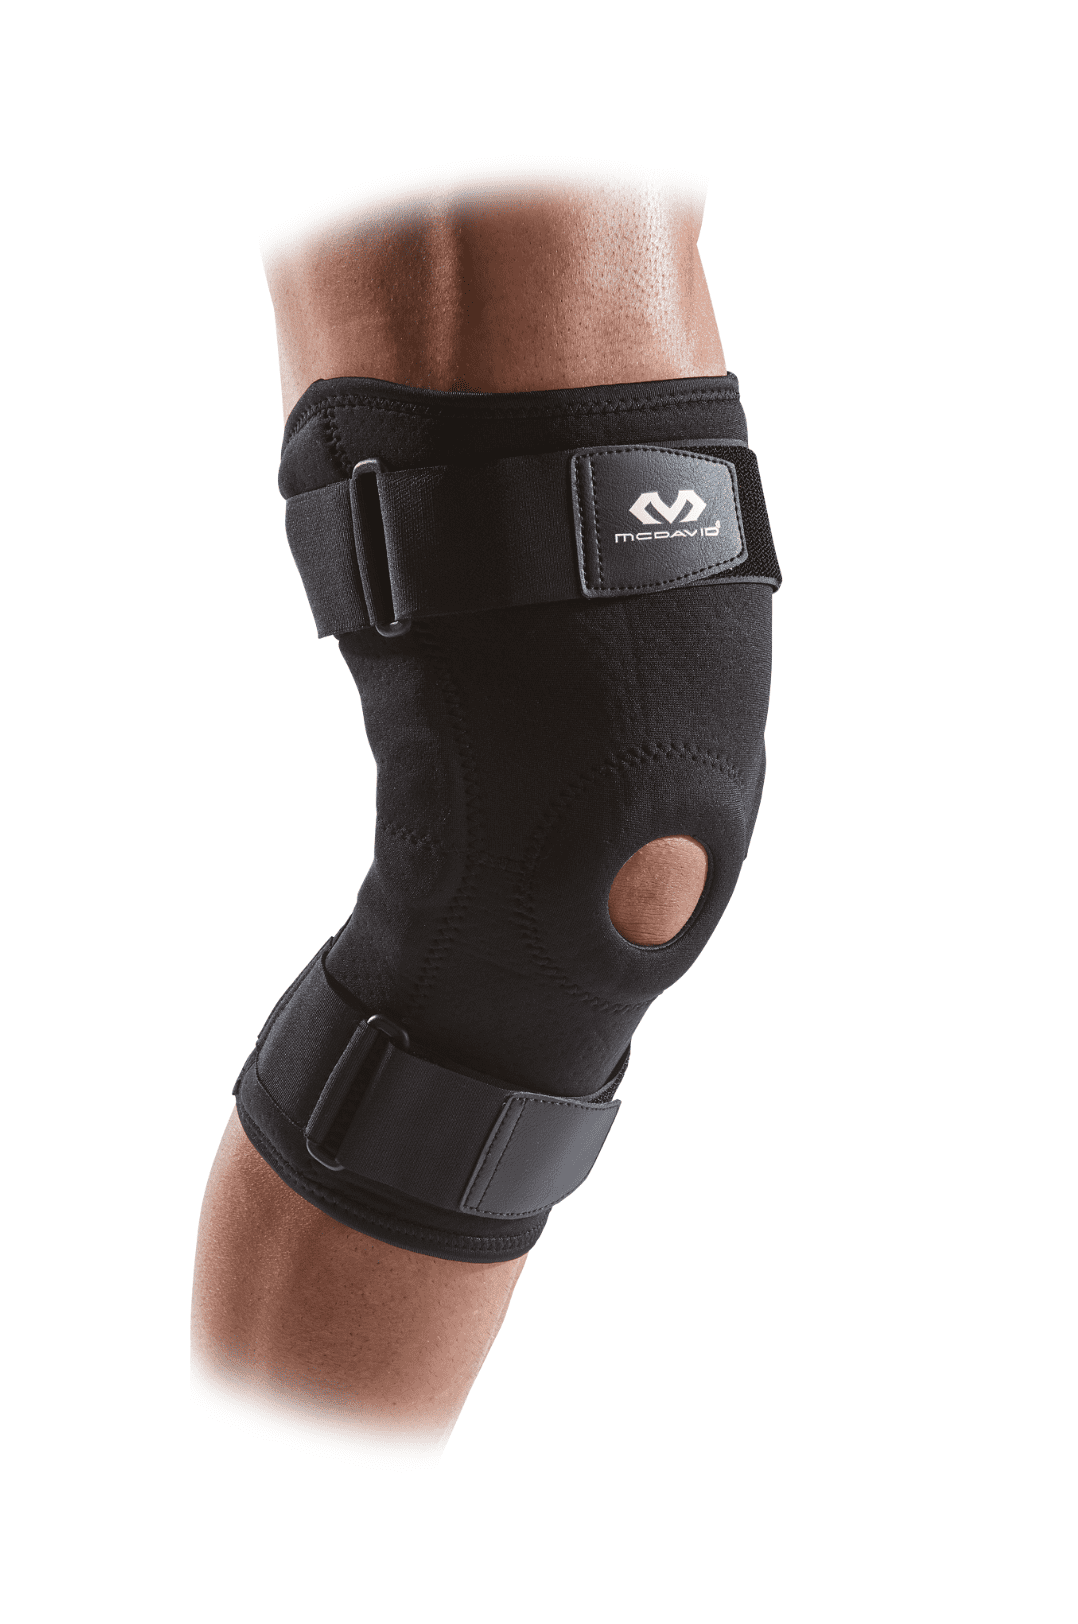 McDavid Knee Brace W/ Dual Hinge Support for Support and Relief, Large ...